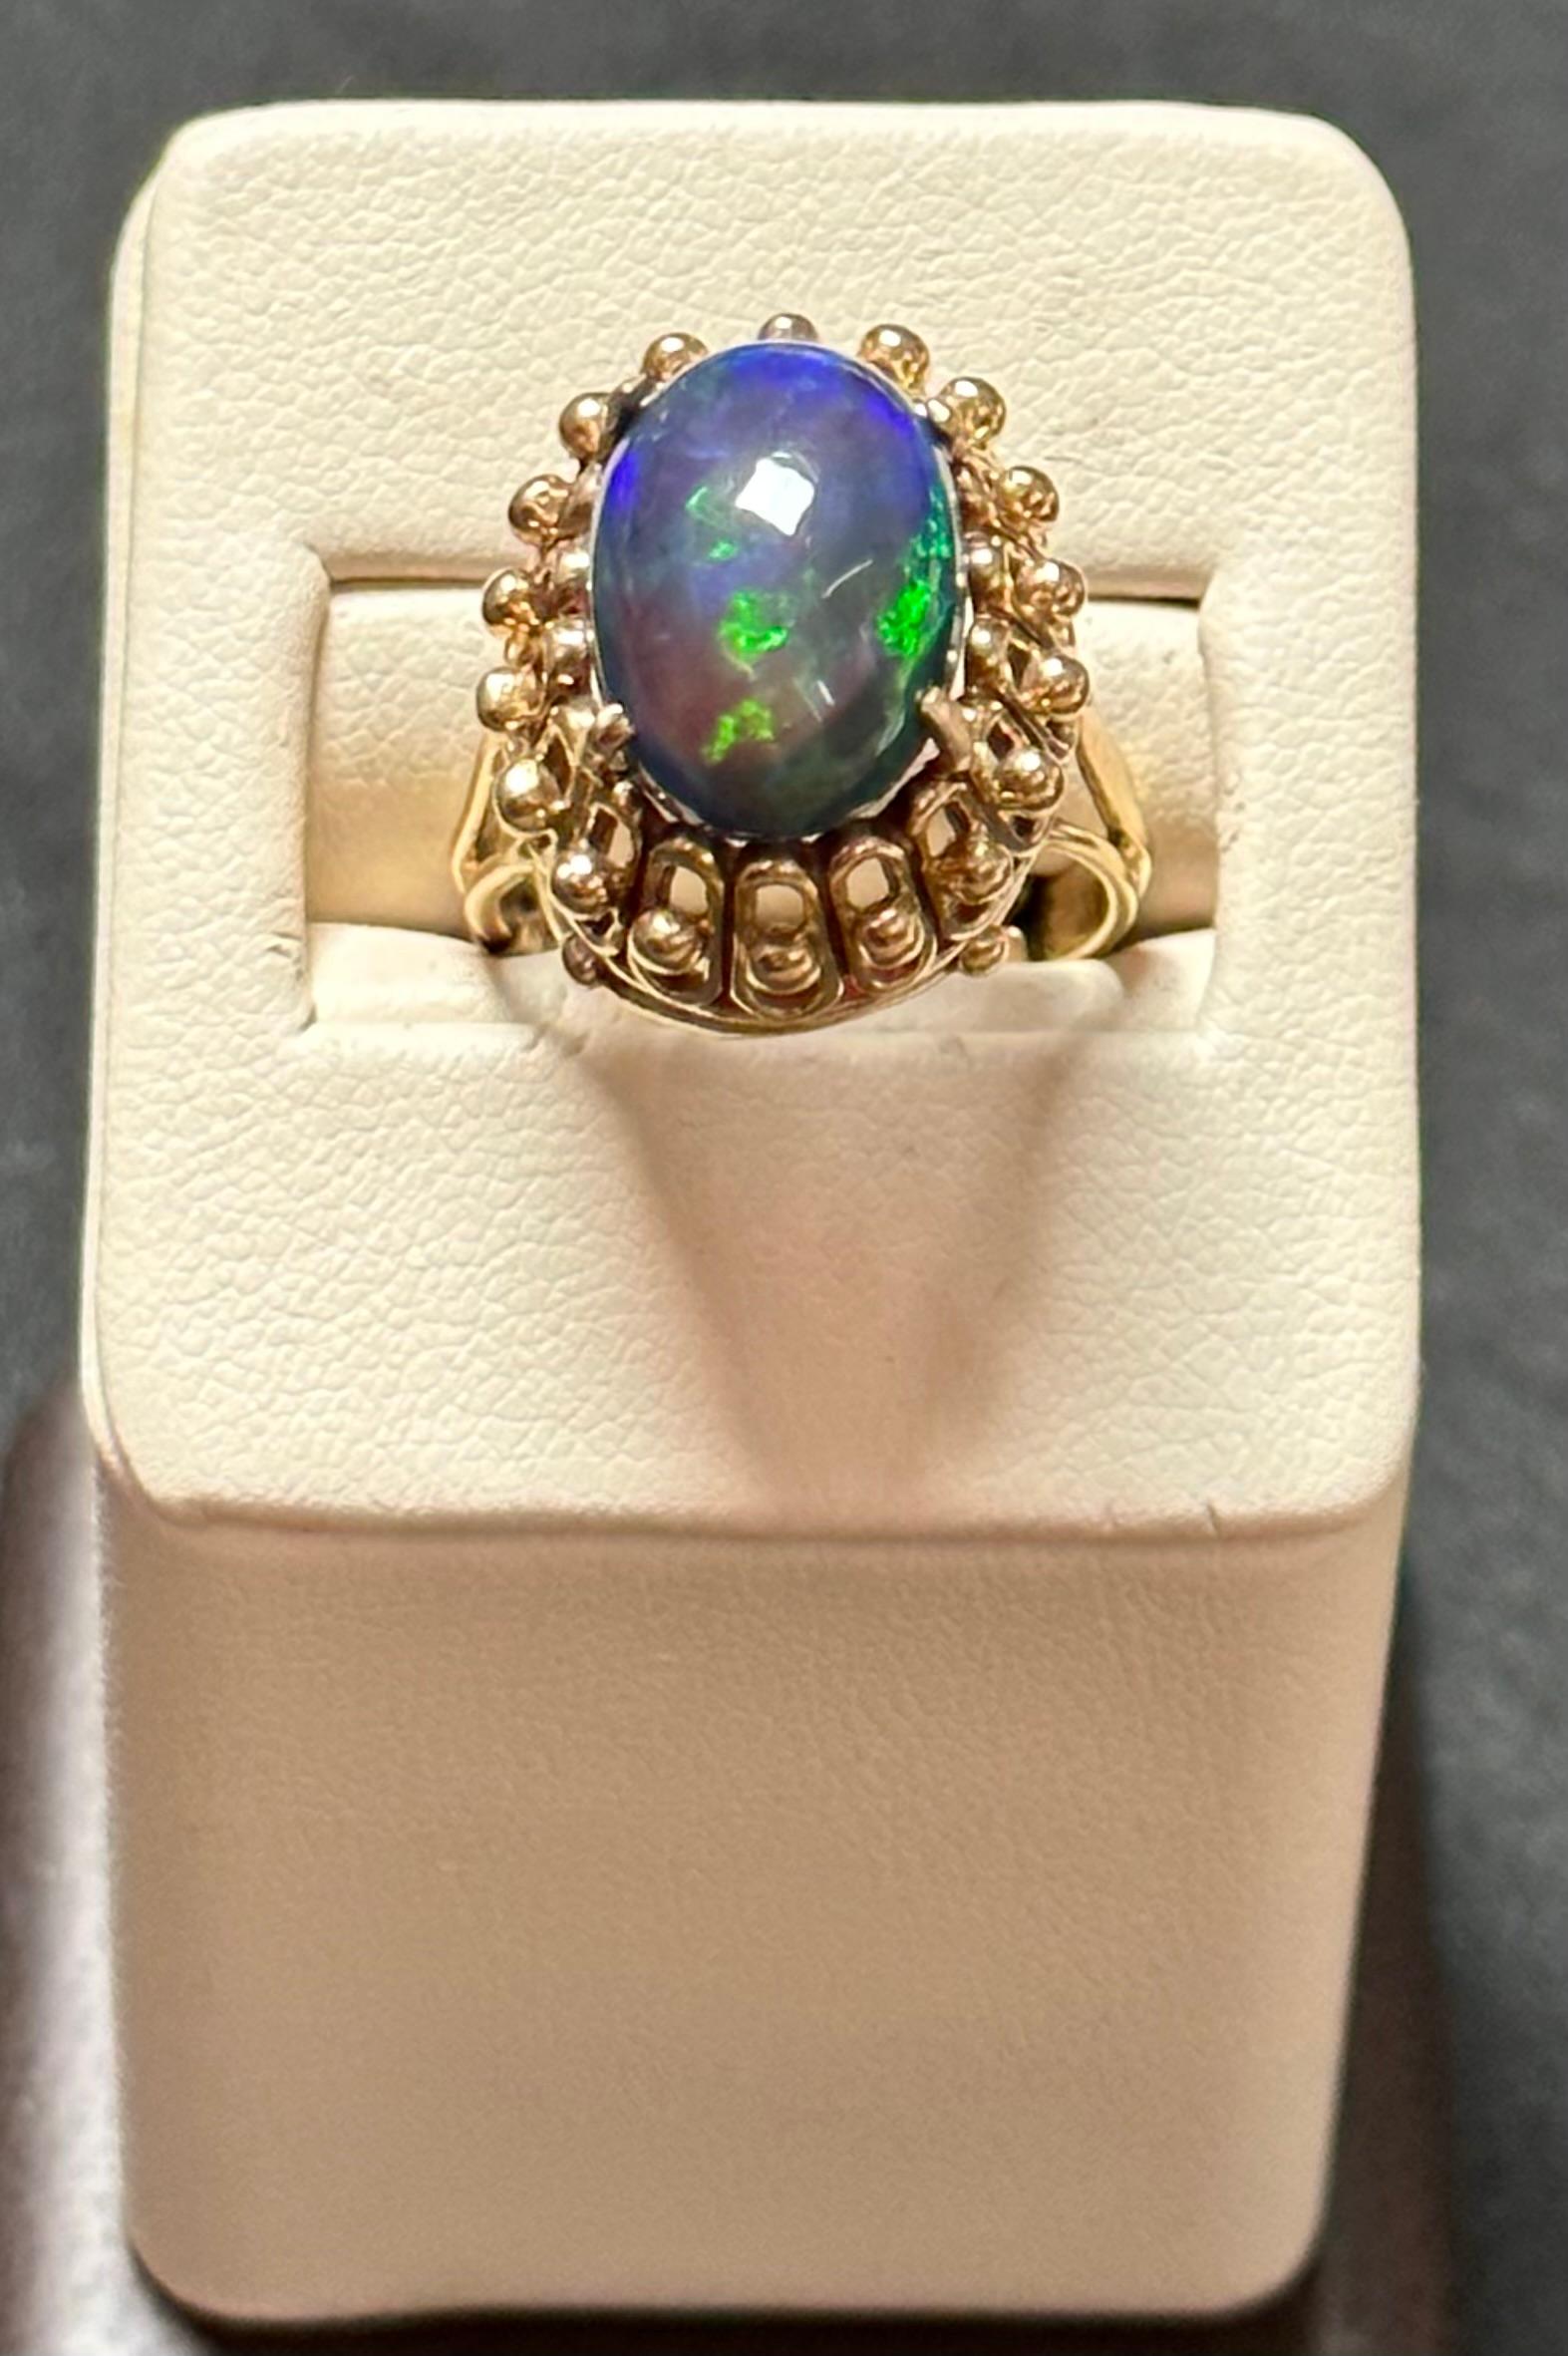 Introducing our extraordinary 14 Karat Yellow Gold Cocktail Ring showcasing a dazzling 3.0 carat oval-shaped Black Australian Opal. This magnificent piece displays stunning shades of green and blue, creating a mesmerizing spectacle. 

The opal in